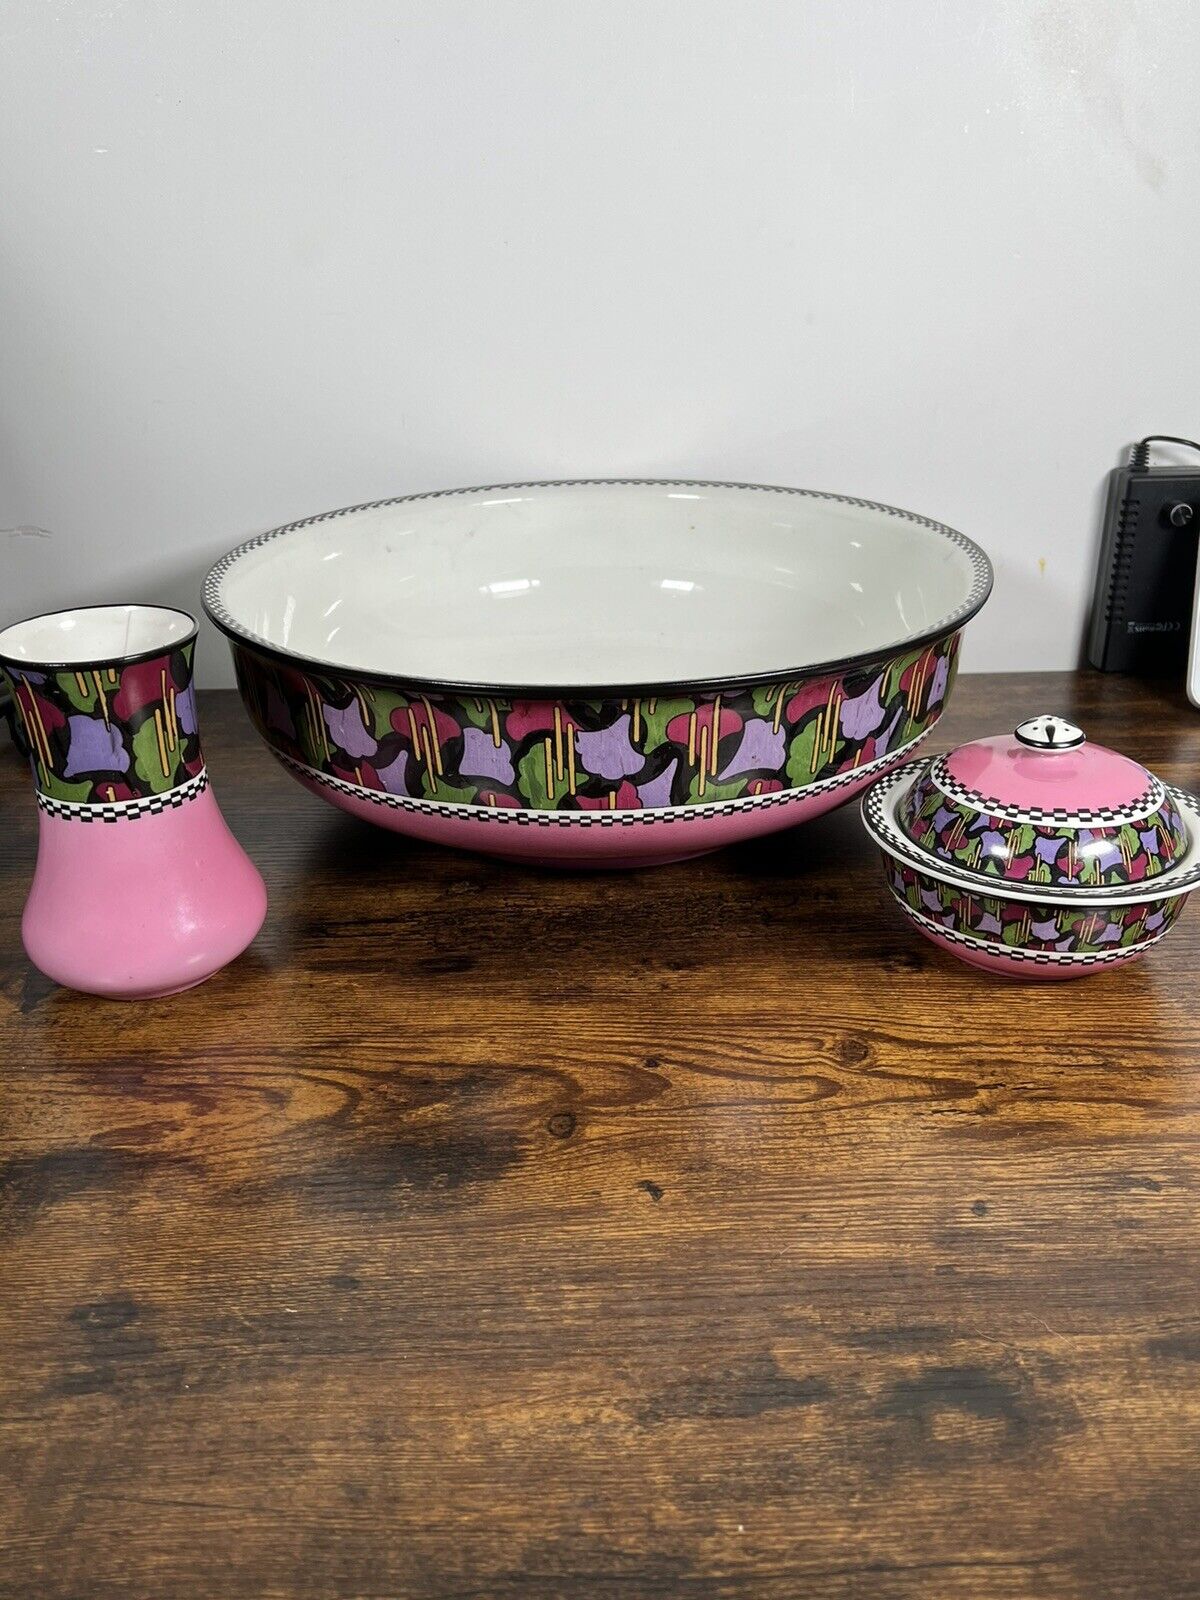 Extremely Rare Imperial Porcelain Wedgwood Antique 1920s Art Deco Wash Set Pink